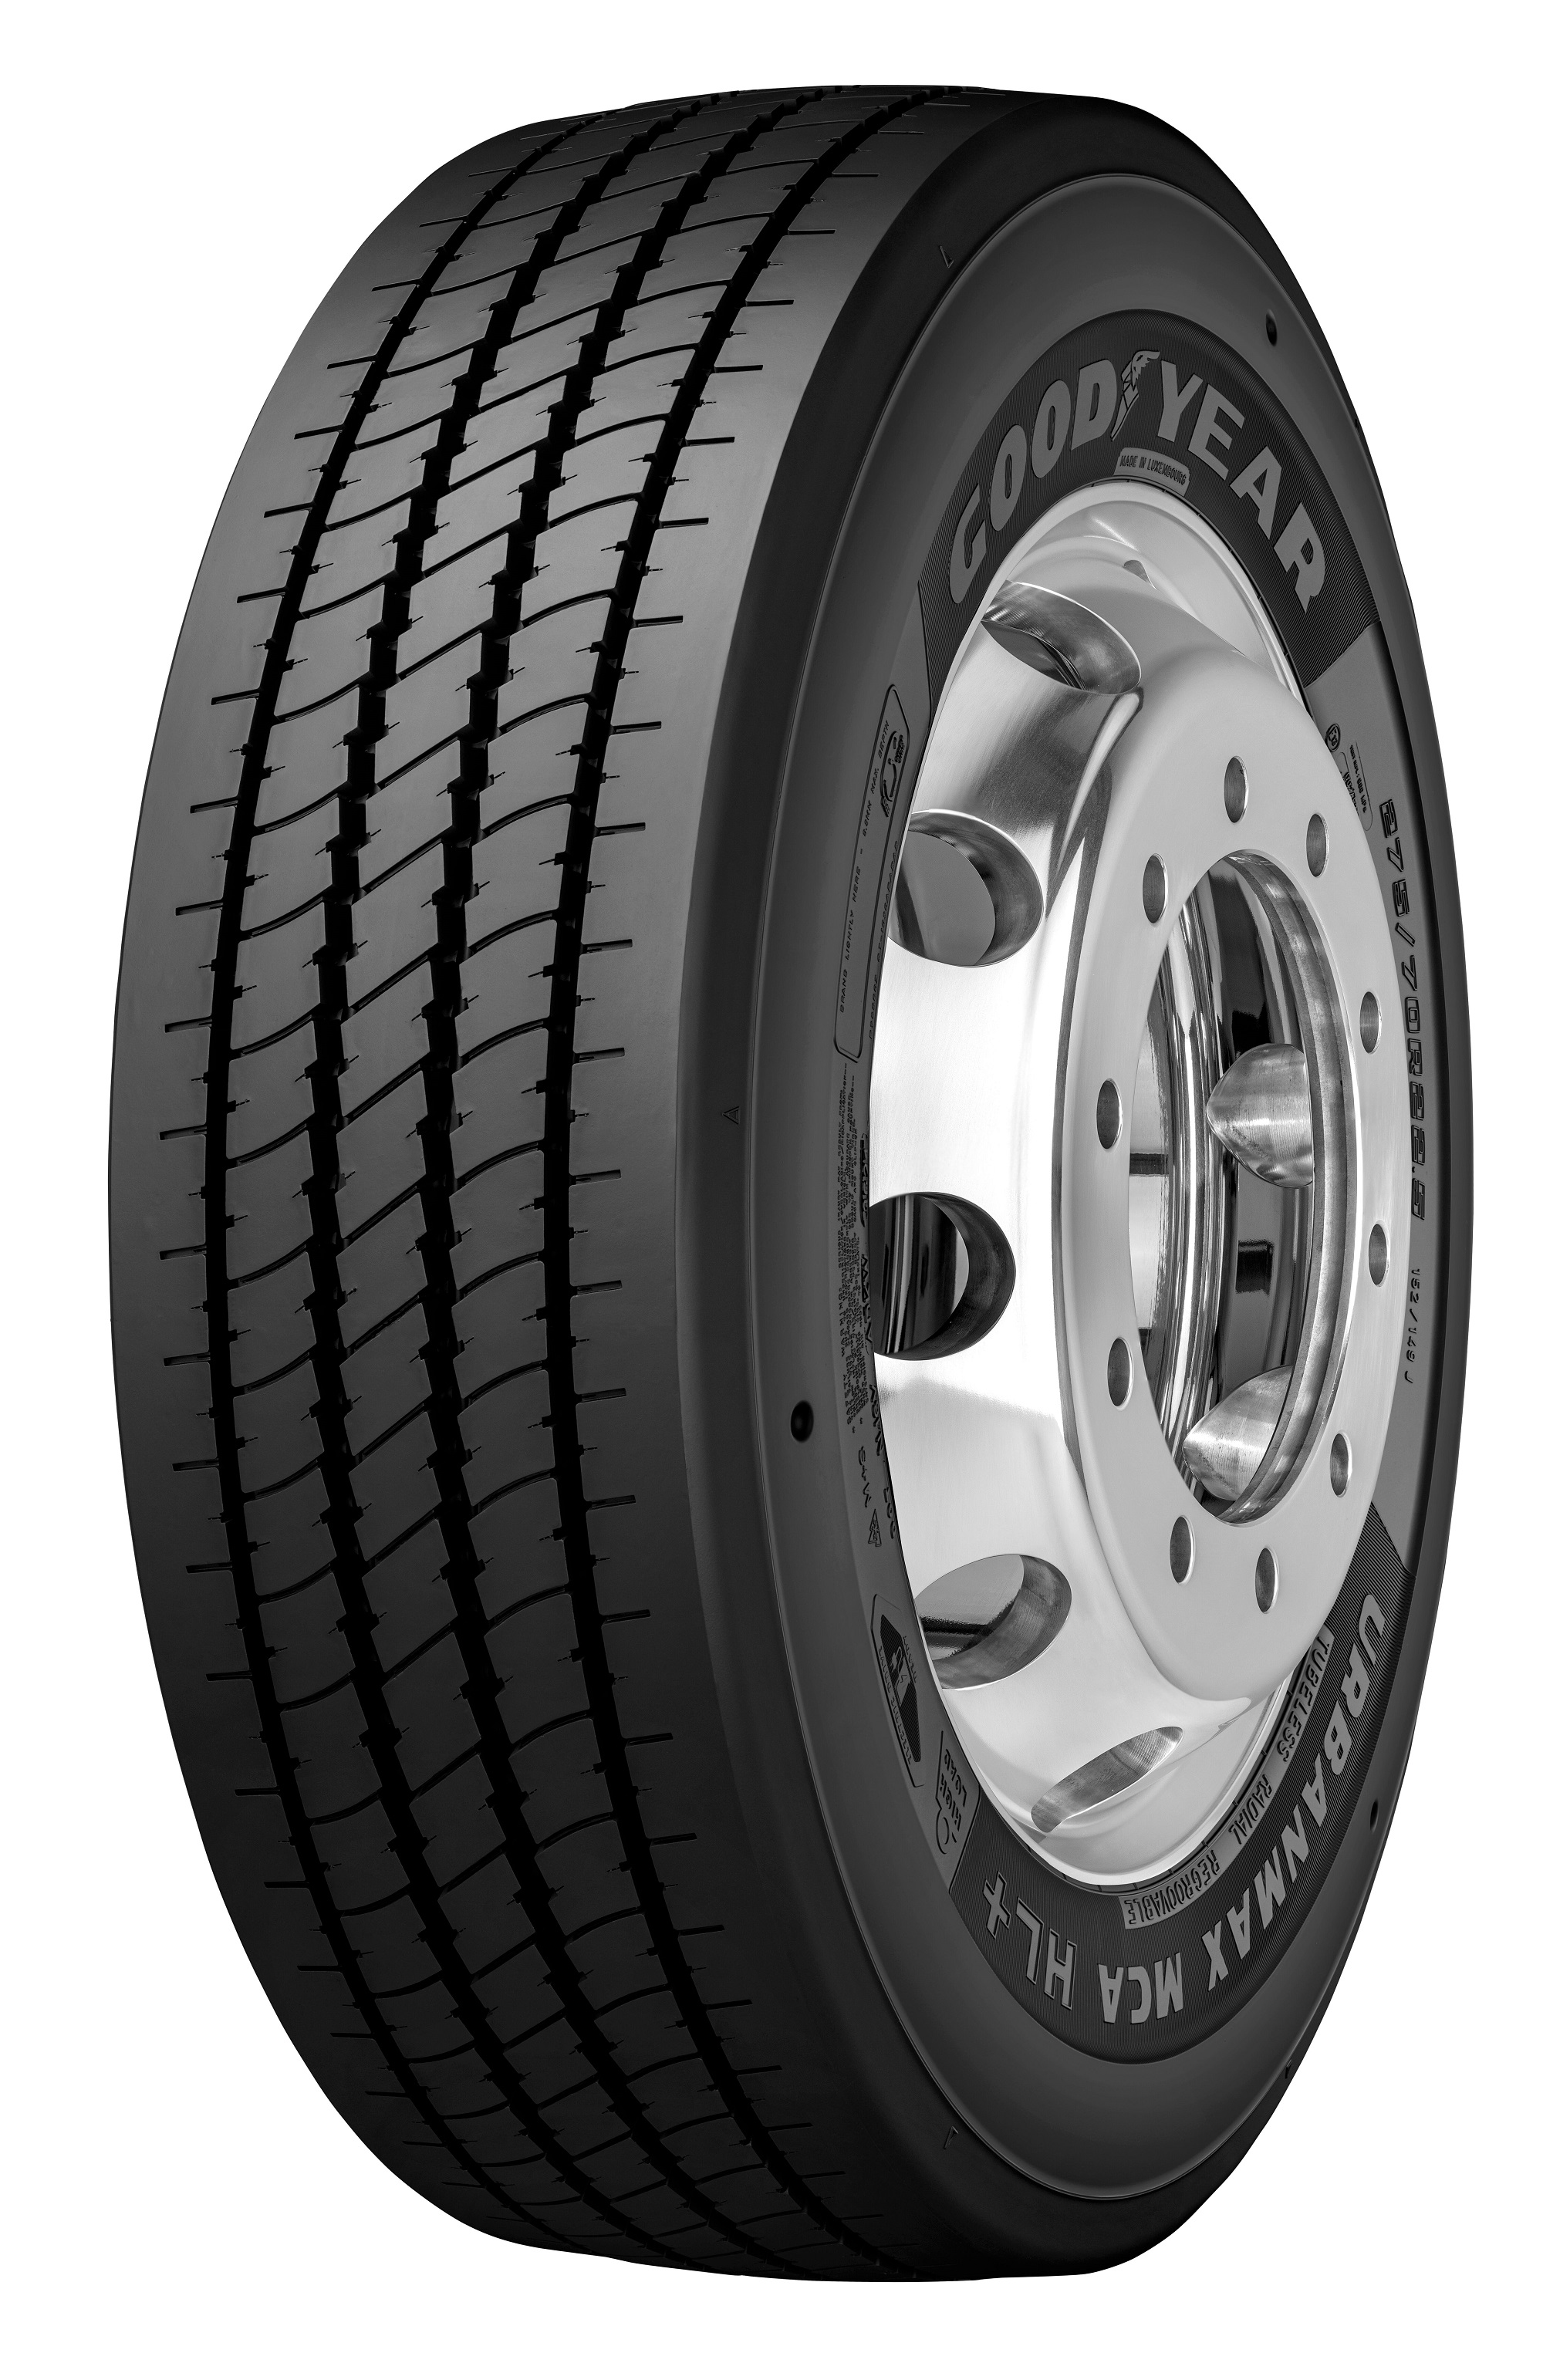 Goodyear launches new low-emission tyres